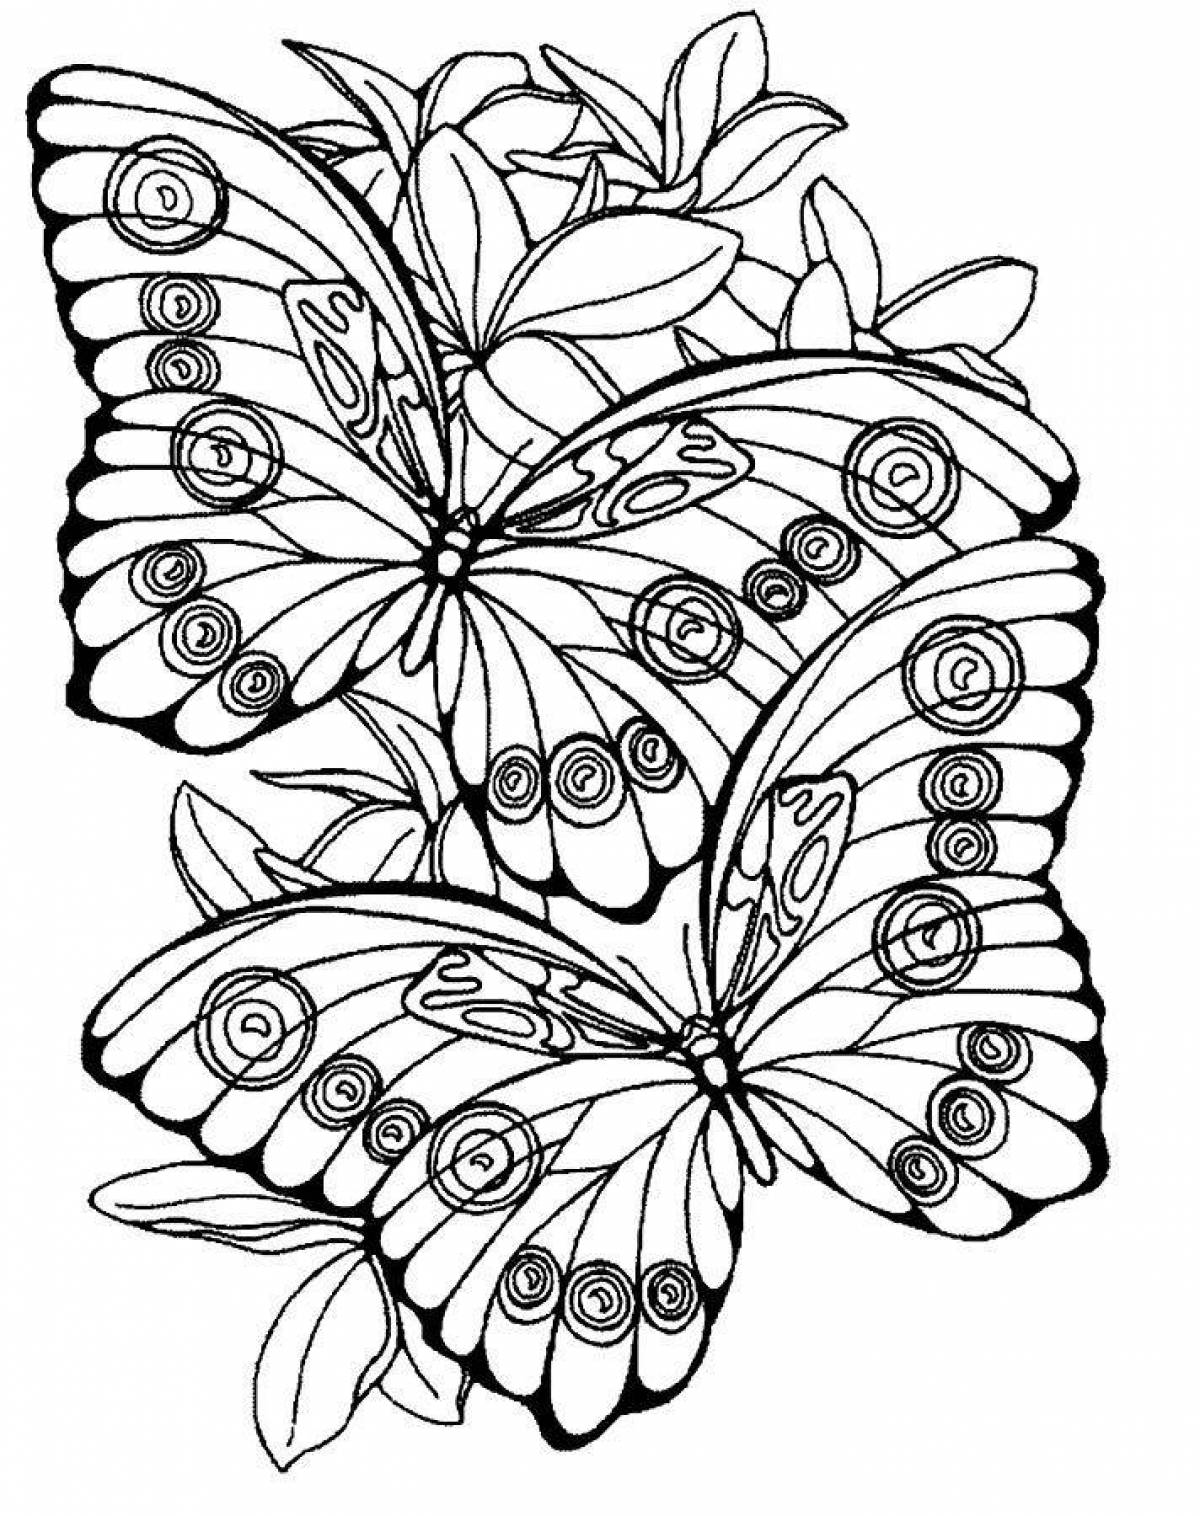 Wednesday magic coloring page